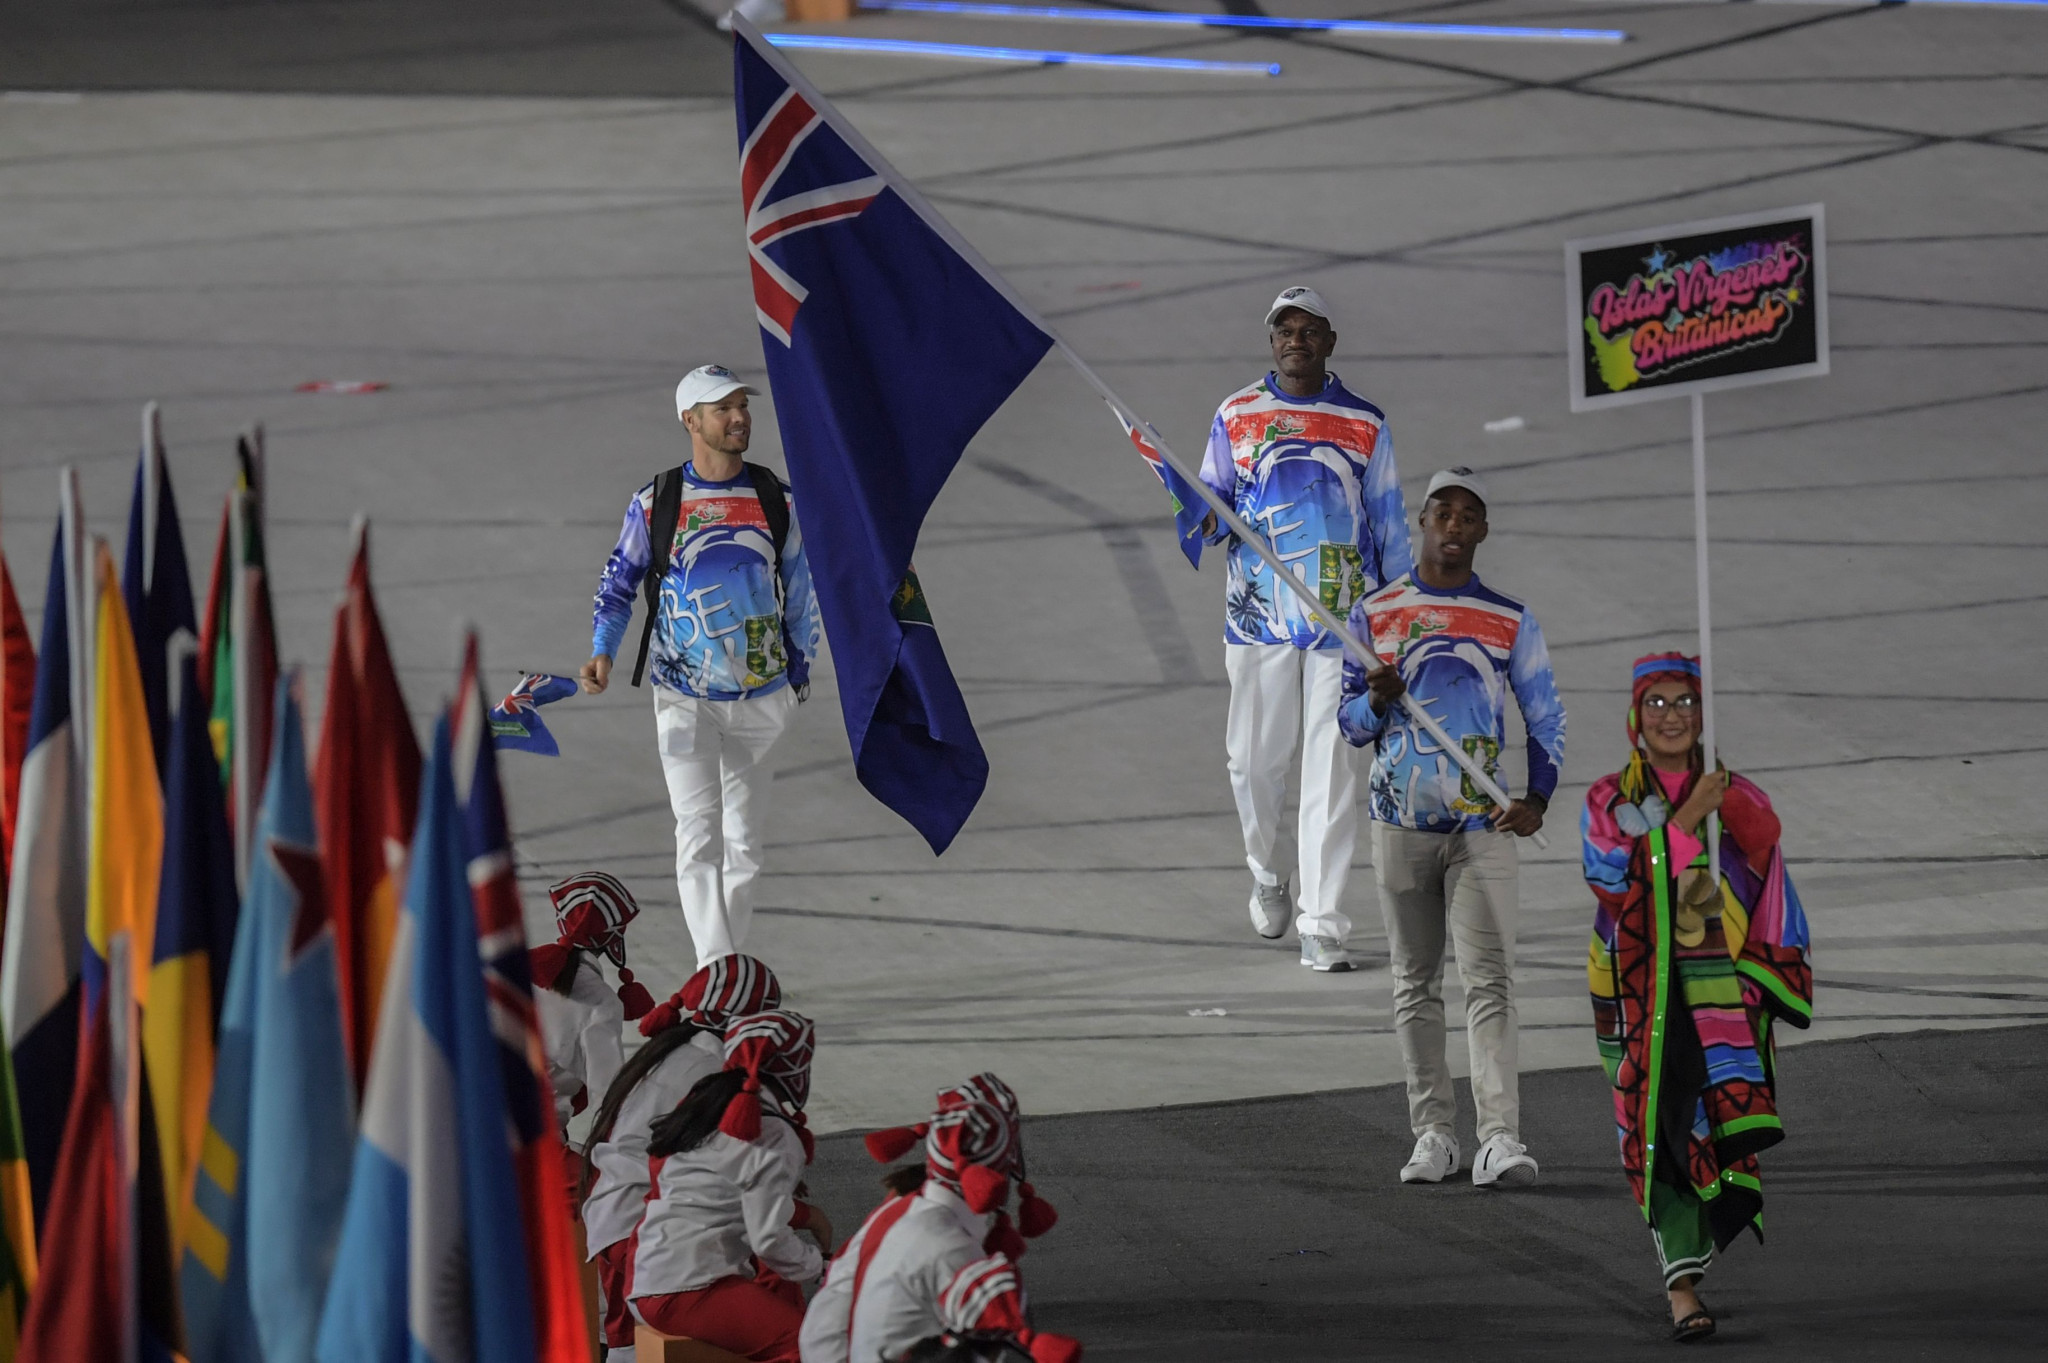 British Virgin Islands Olympic Committee "proud" after being given permission to use territorial song in place of national anthem at IOC events